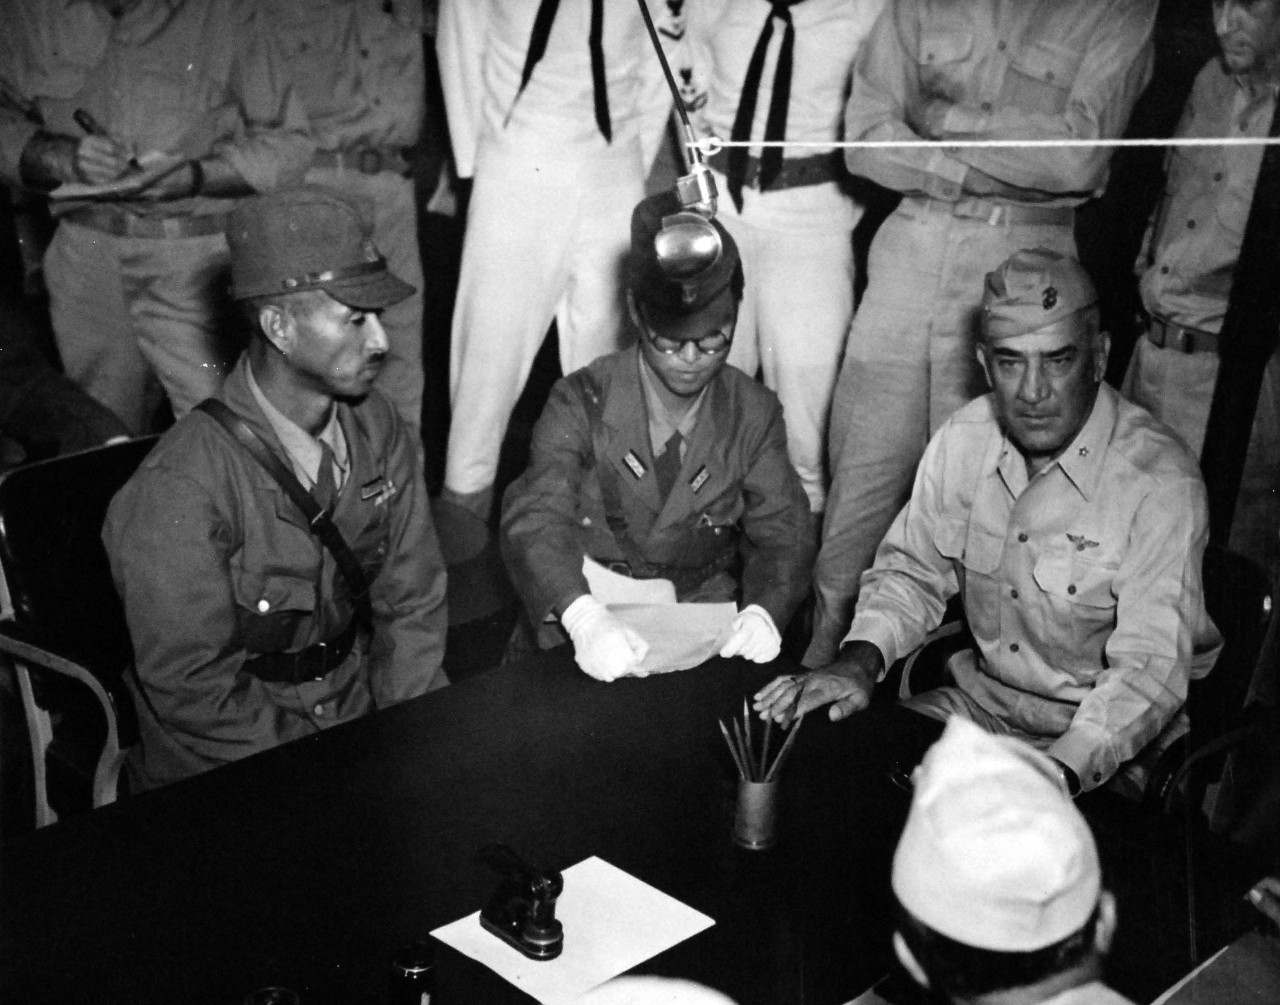 80-G-490485:   Surrender of Wake Island, September 3, 1945.     Discussing the terms of surrender on board USS Levy (DE-162).  Shown left to right:  Rear Admiral Shigematsu Sakaibara, Lieutenant P.H. Nakacato and Brigadier General Lawson Sanderson, USMC.   Photograph released on 4 September 1945.  U.S. Navy photograph, now in the collections of the National Archives.    (2014/5/29).